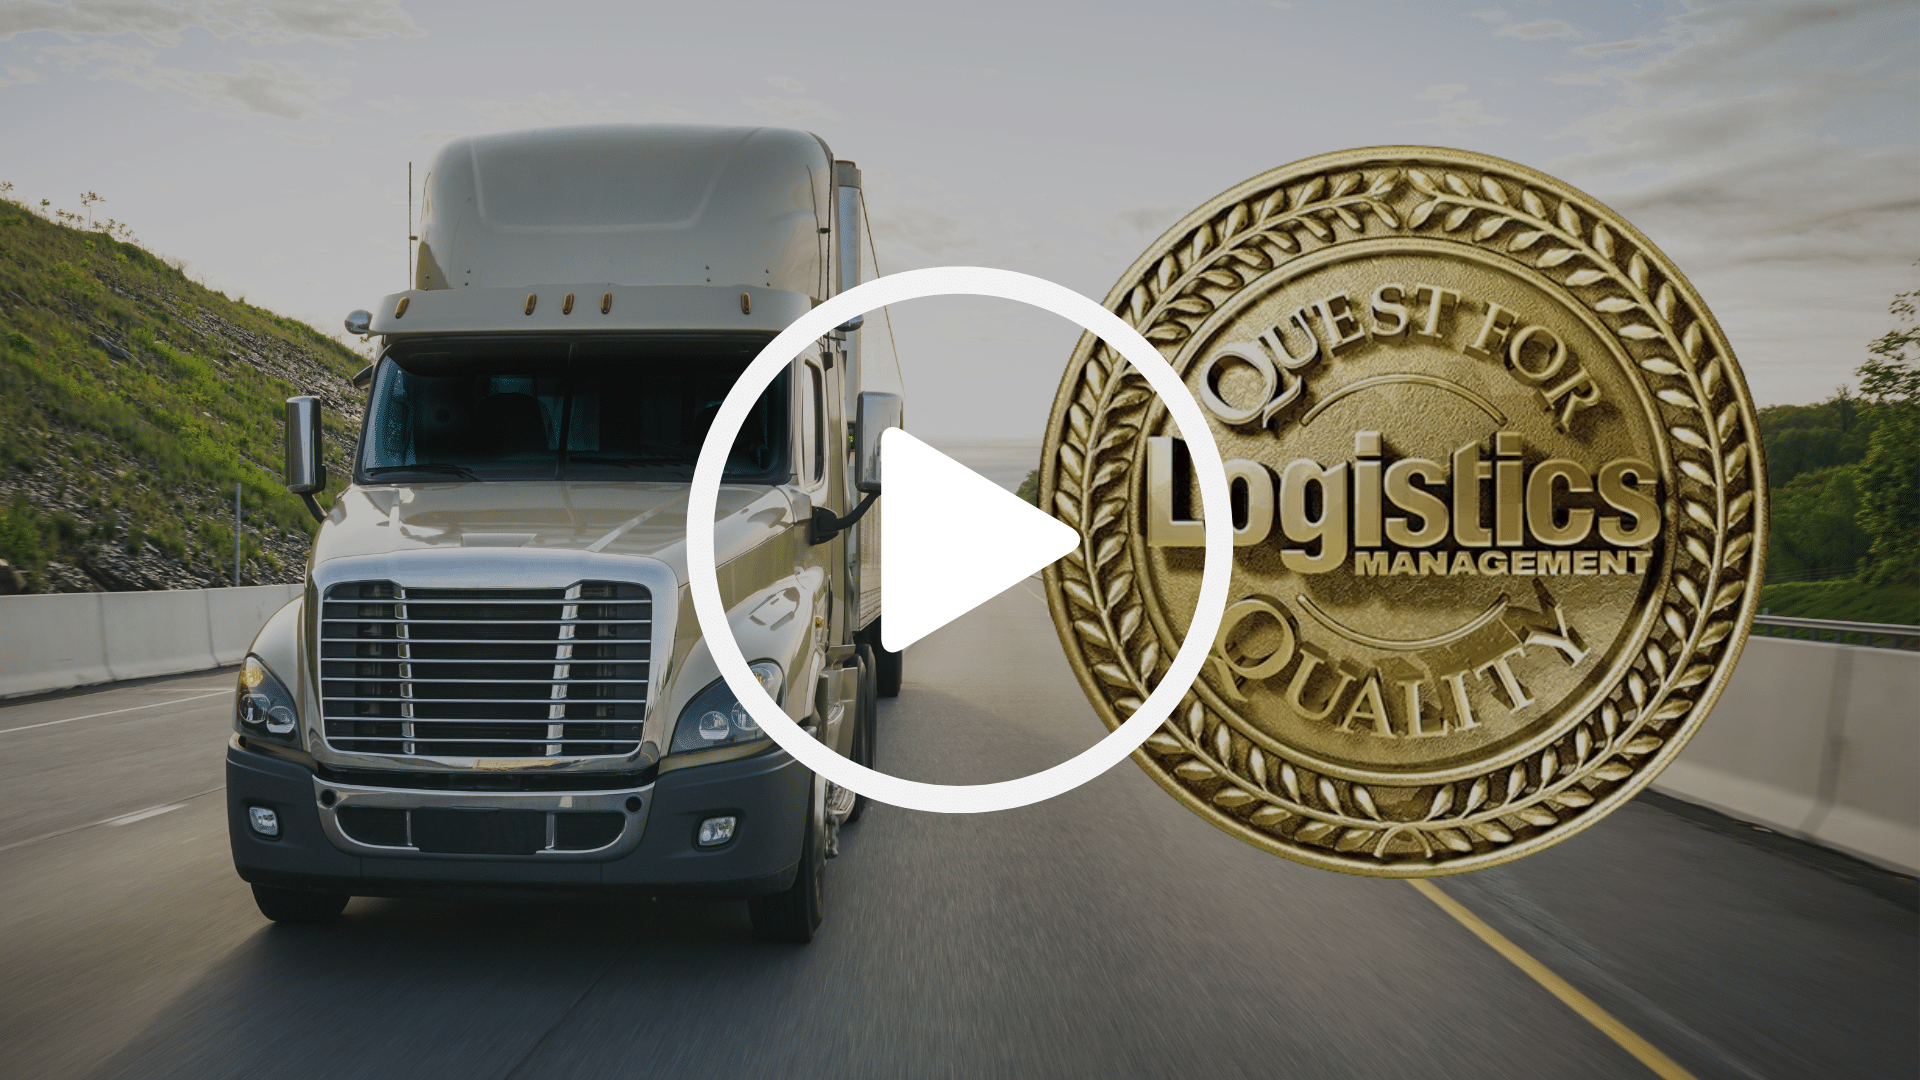 Thumbnail with a semi truck and the Quest for Quality logo